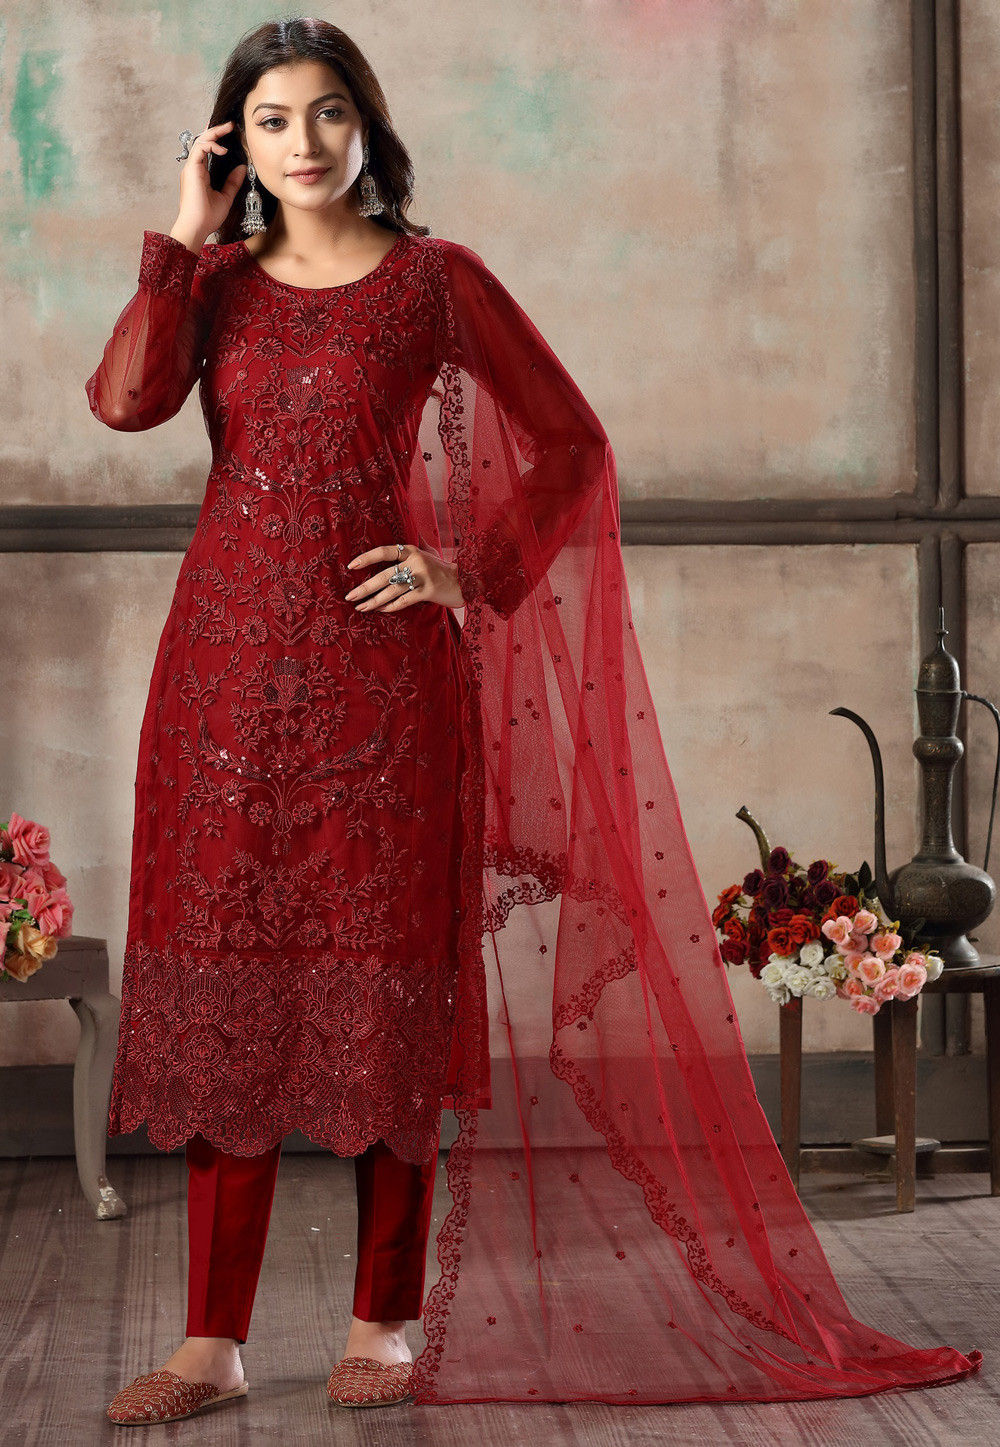 Embroidered Net Pakistani Suit in Maroon : KCH9407